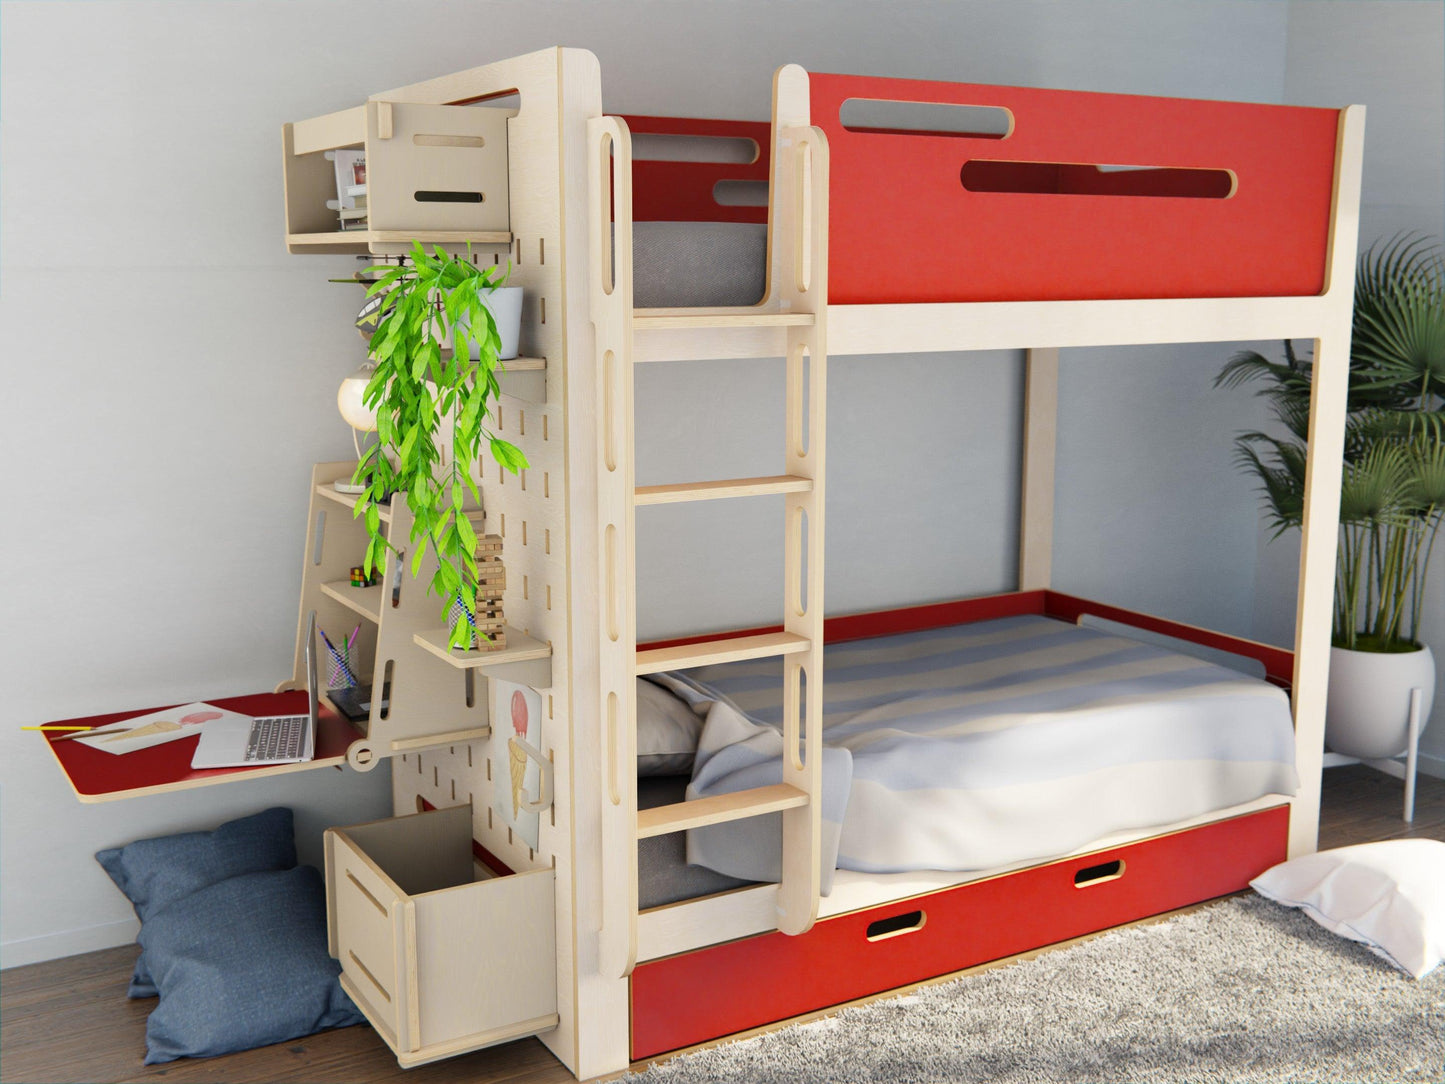 Experience functional elegance with our plywood bunk beds in red. Complete with study set, shelves, and drawer. 